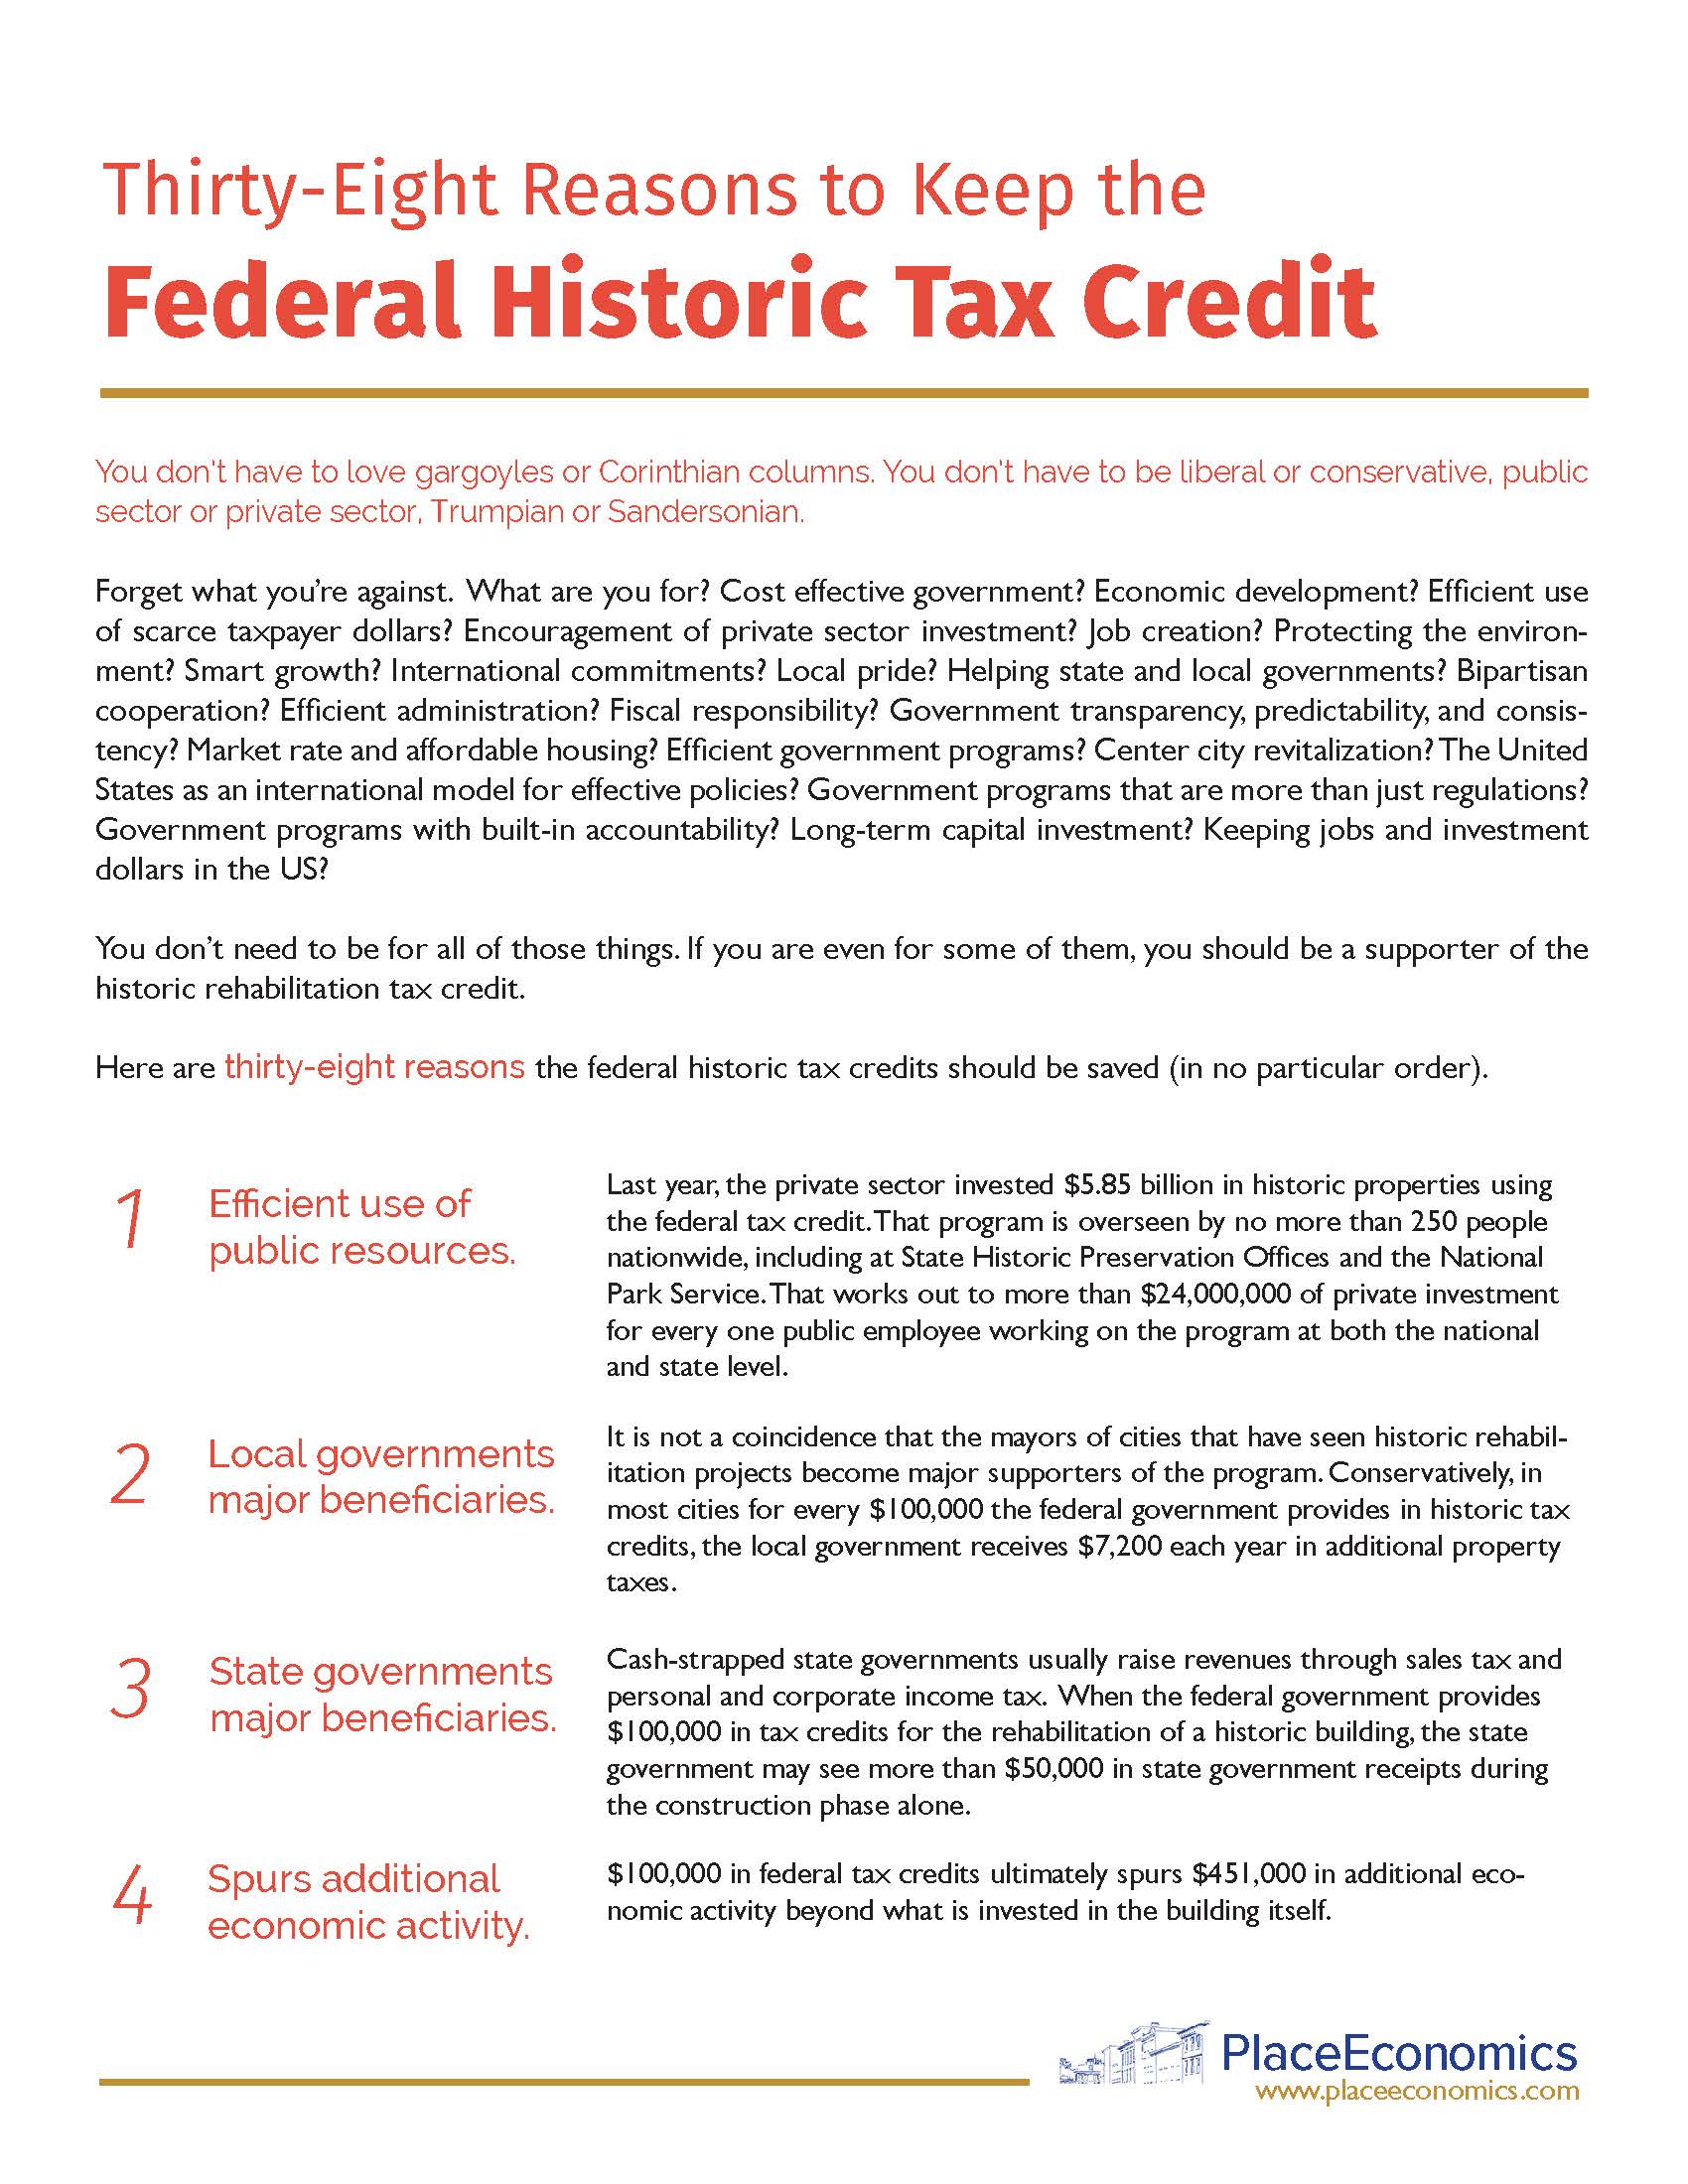 38-Reasons-to-Keep-the-Federal-Historic-Tax-Credit-V5_Page_1.jpg